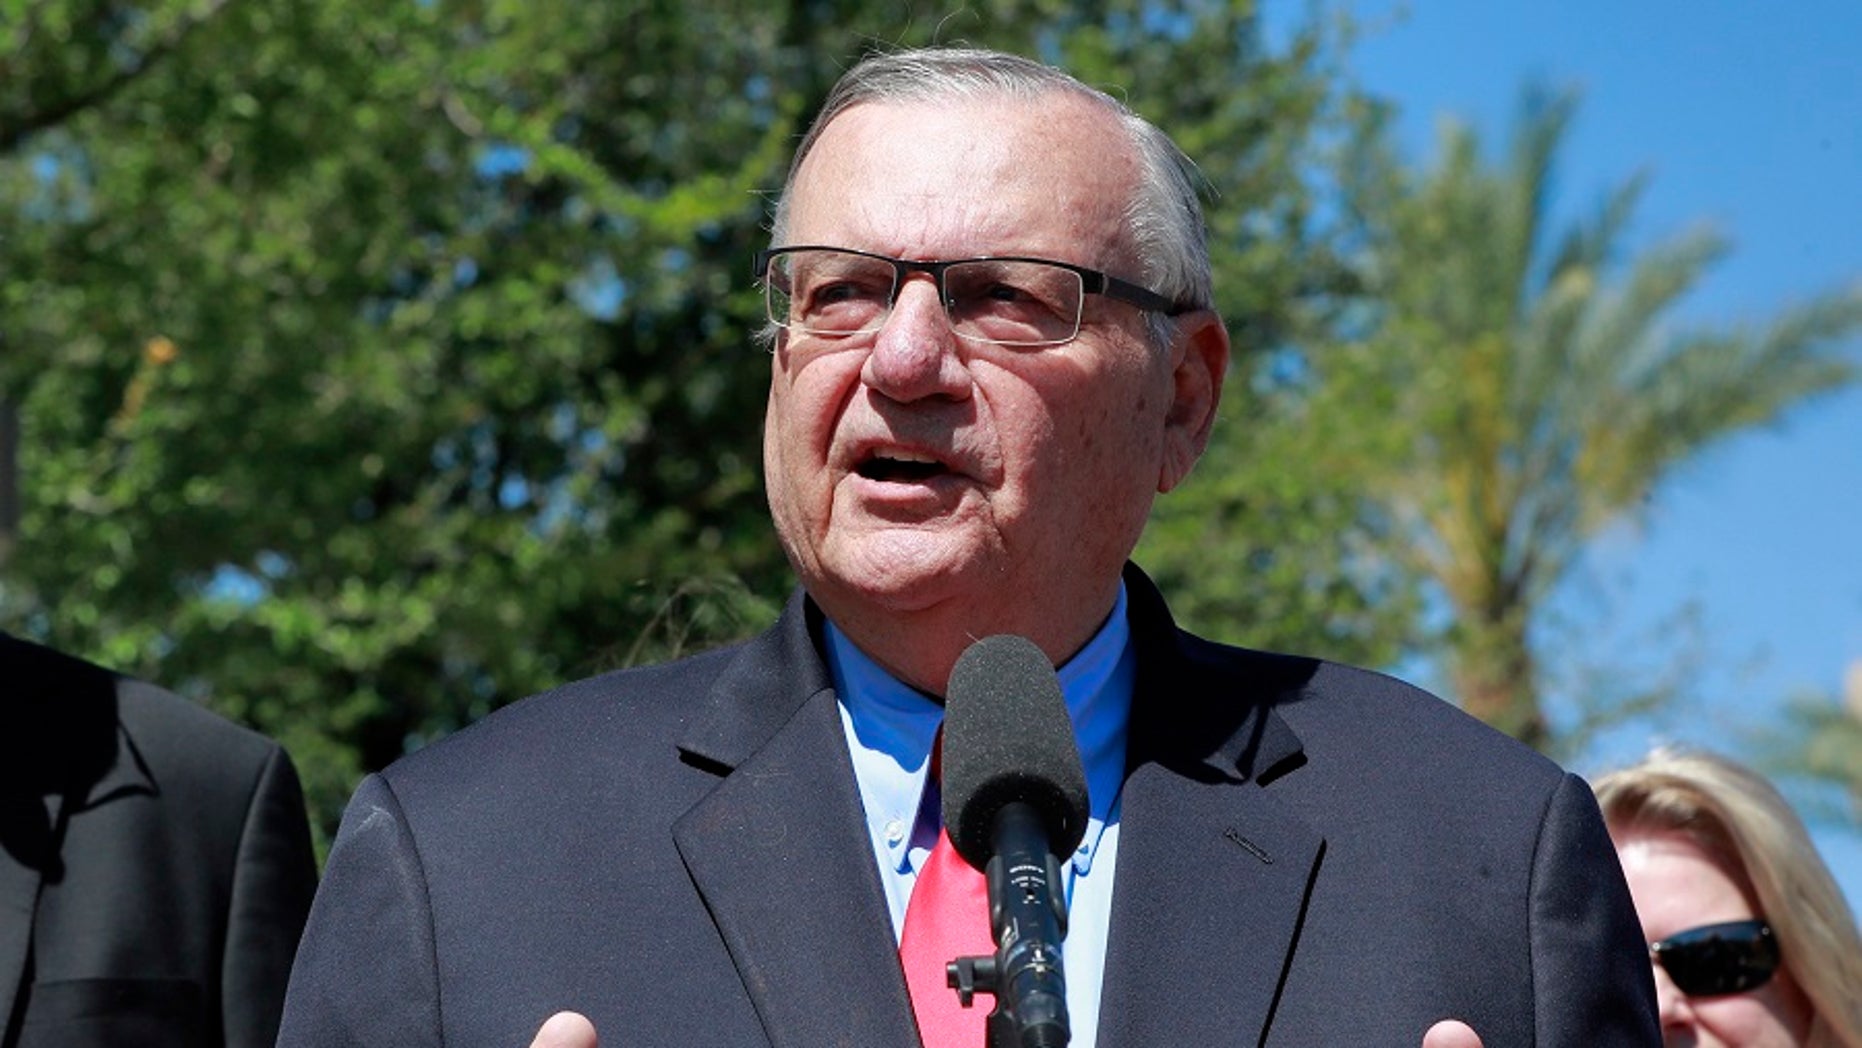 Arpaio files libel suit against The New York Times Fox News